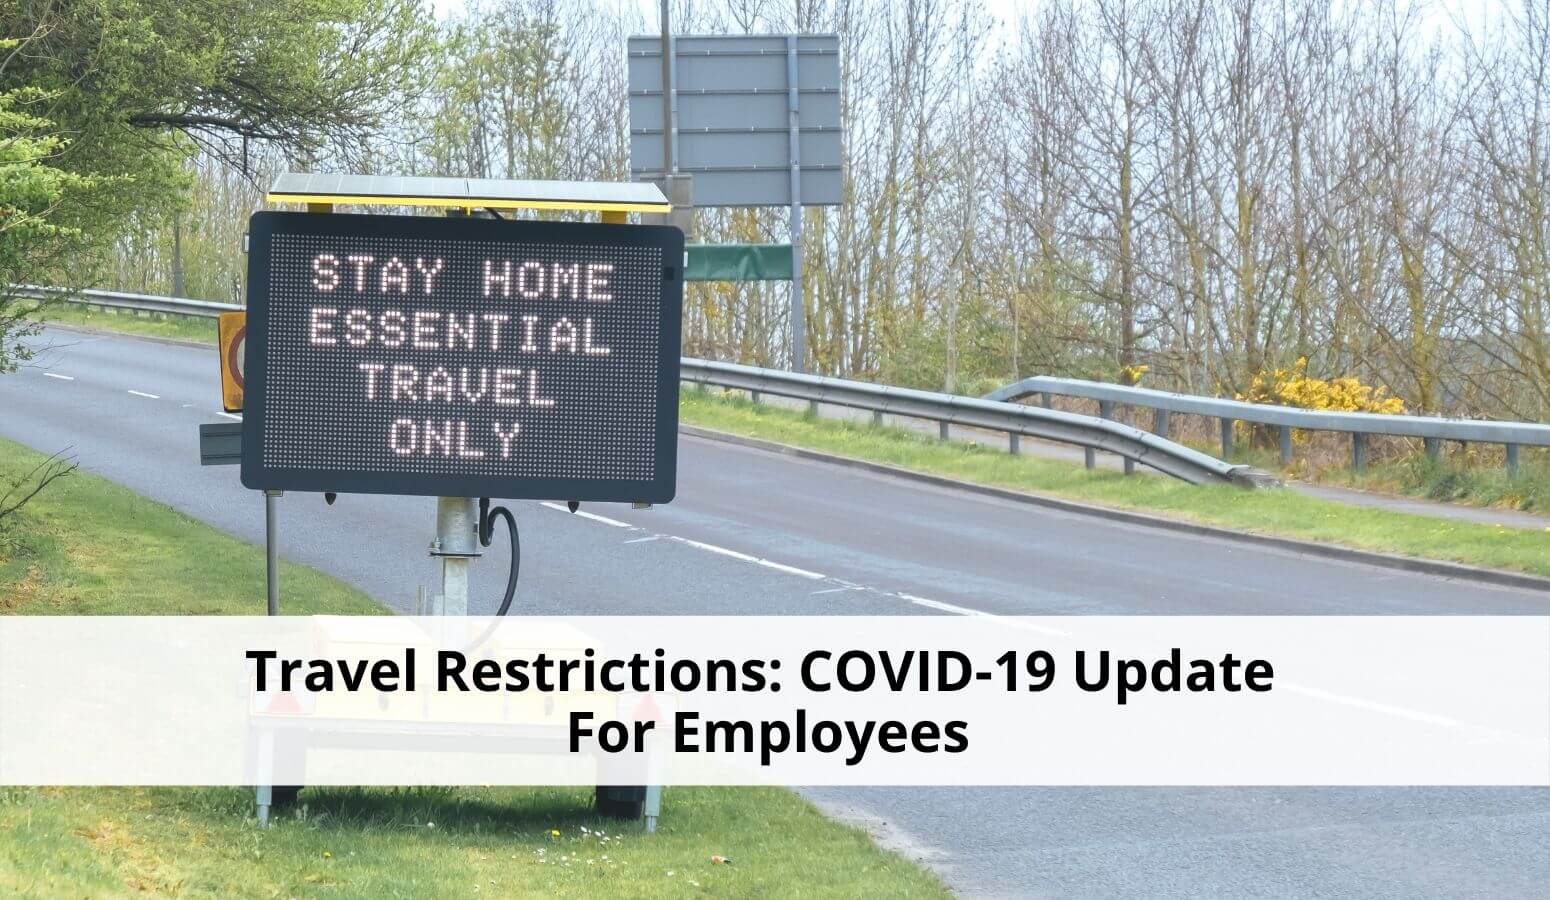 Featured image for “Travel Restrictions: COVID-19 Update For Employees”